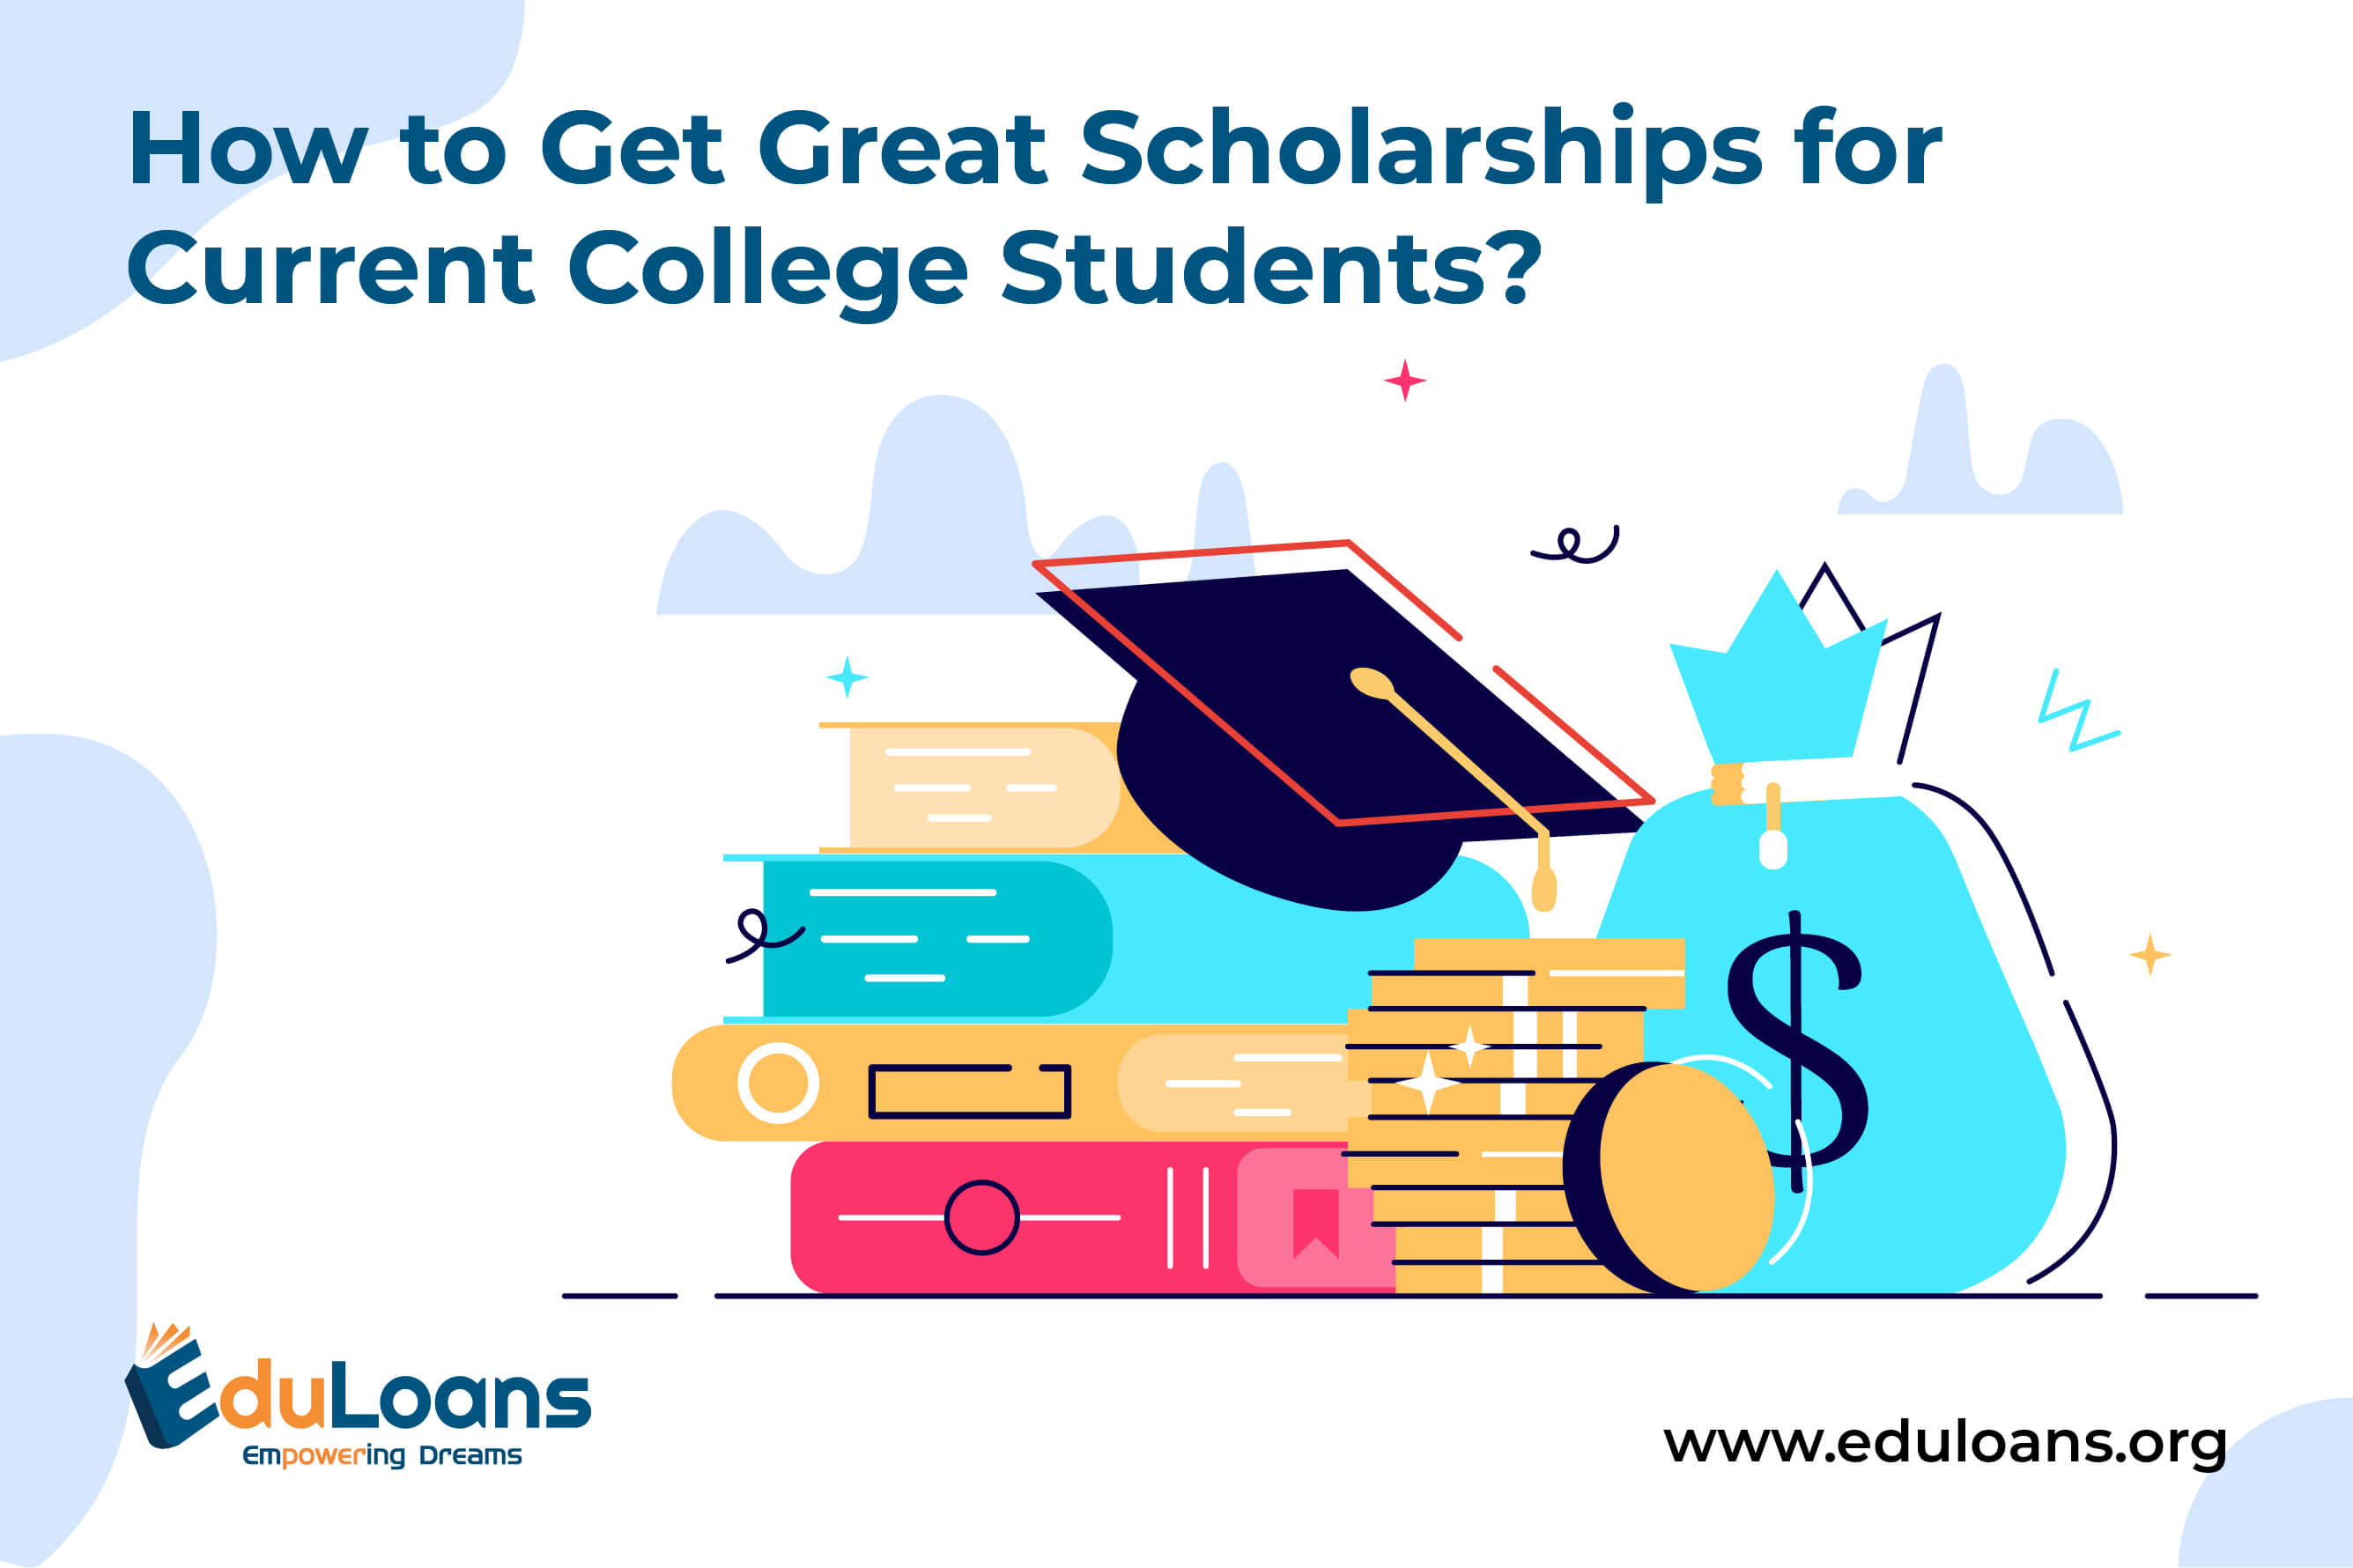 How to Get Great Scholarships for Current College Students?